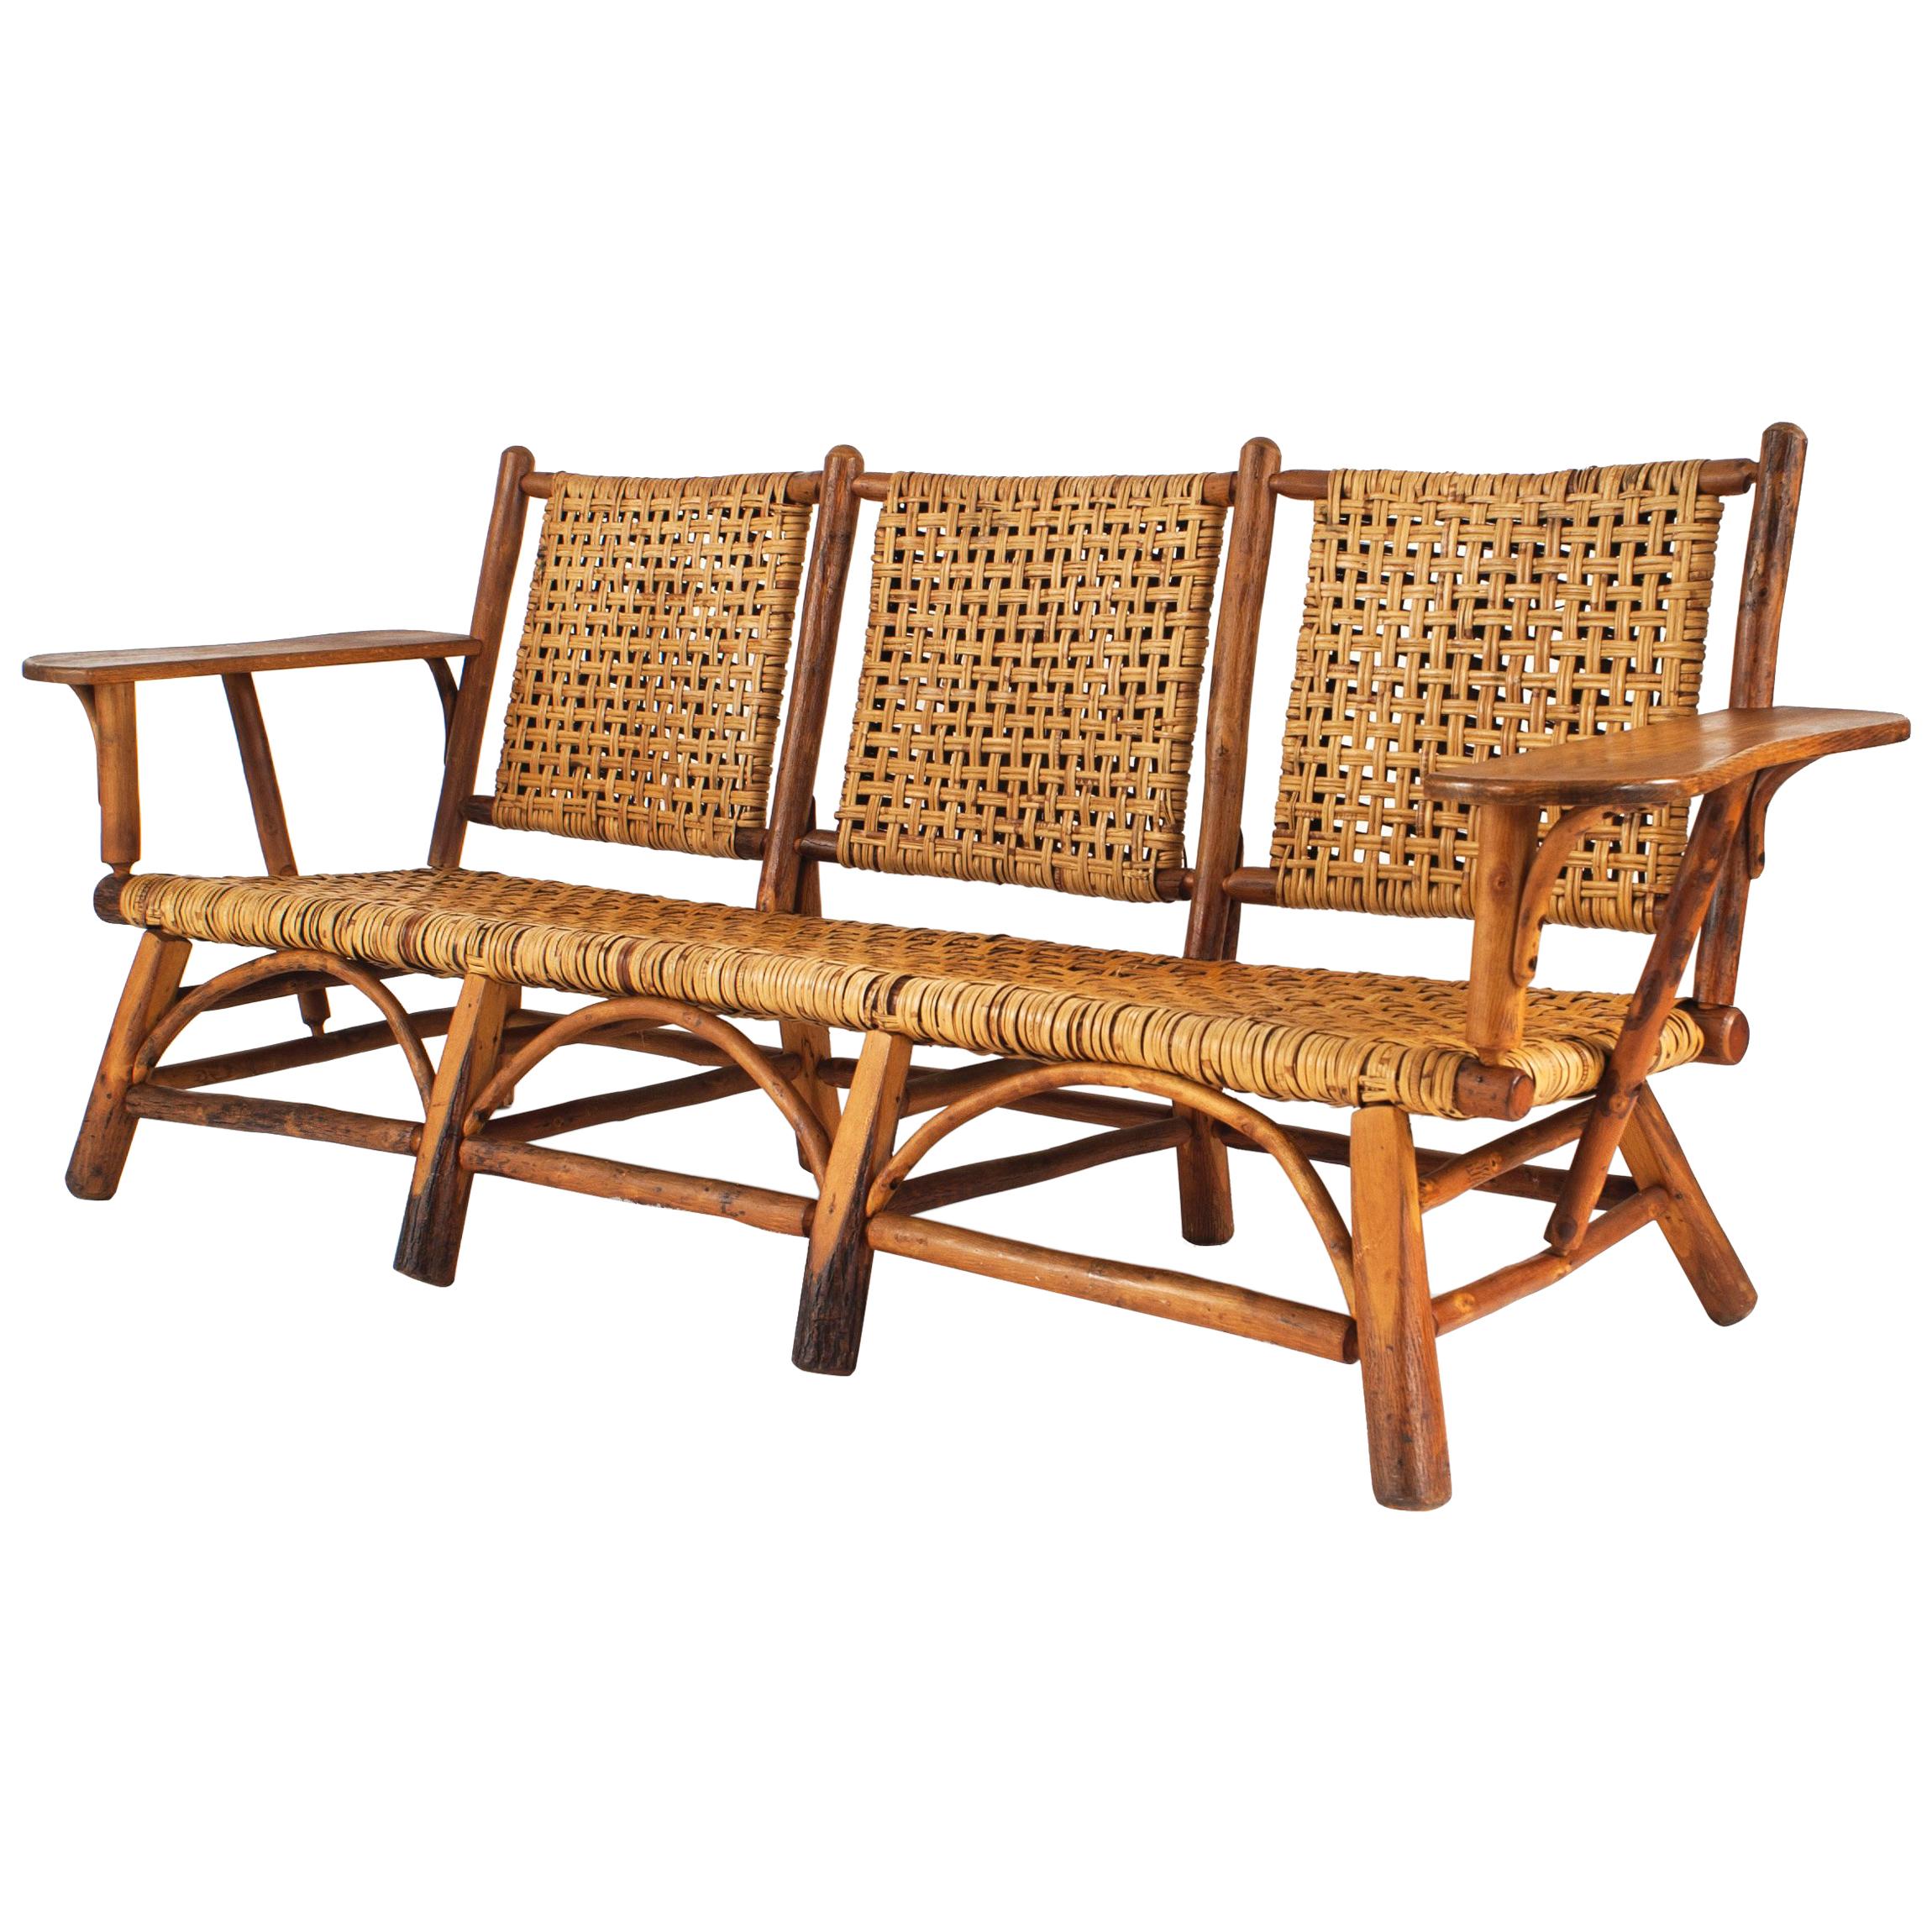 Rustic Old Hickory Settee, by Old Hickory